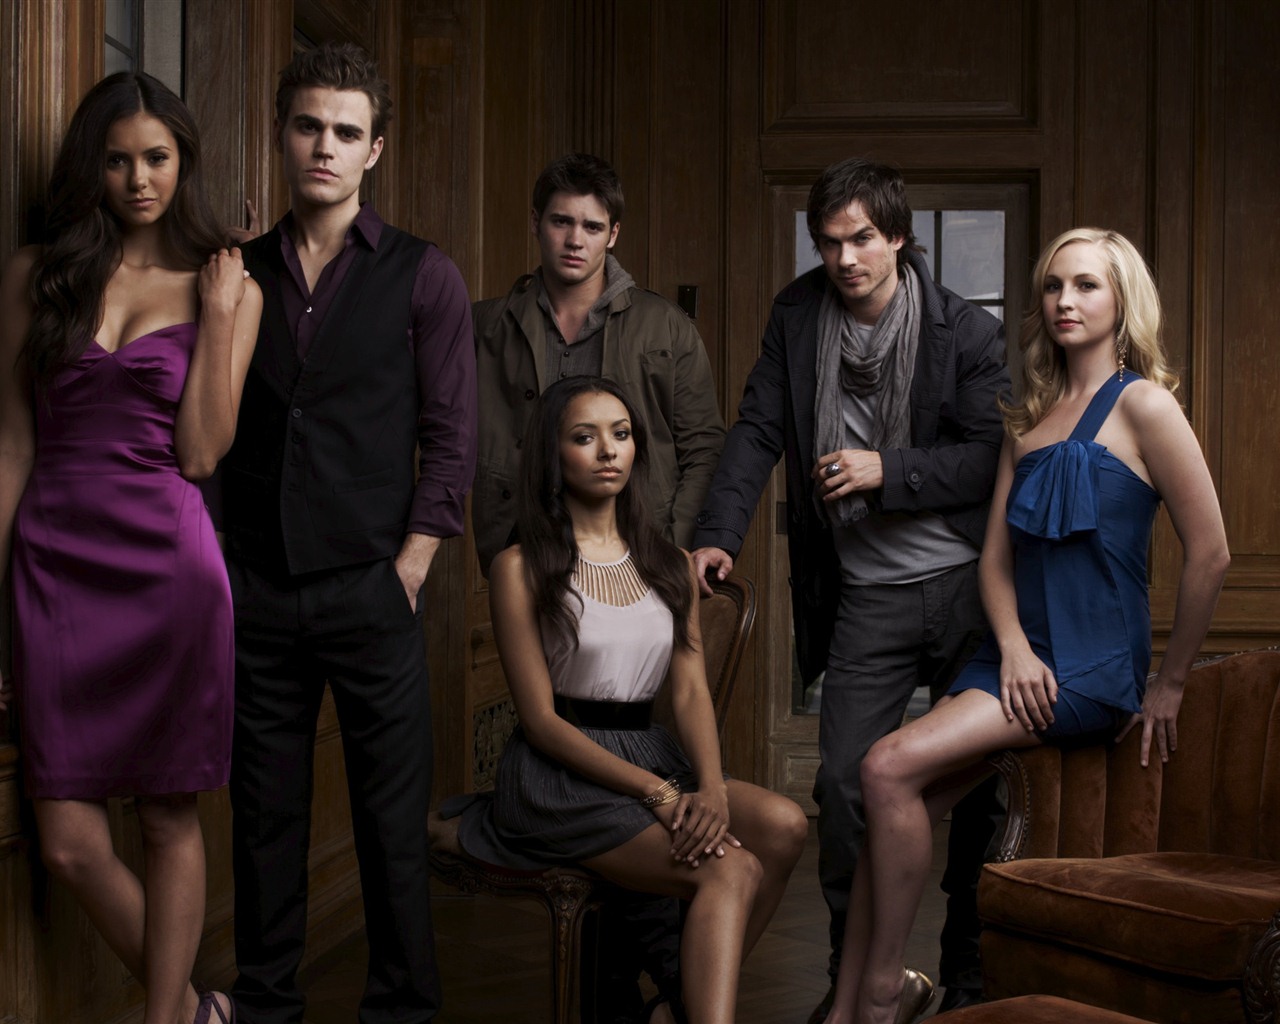 The Vampire Diaries wallpapers HD #19 - 1280x1024